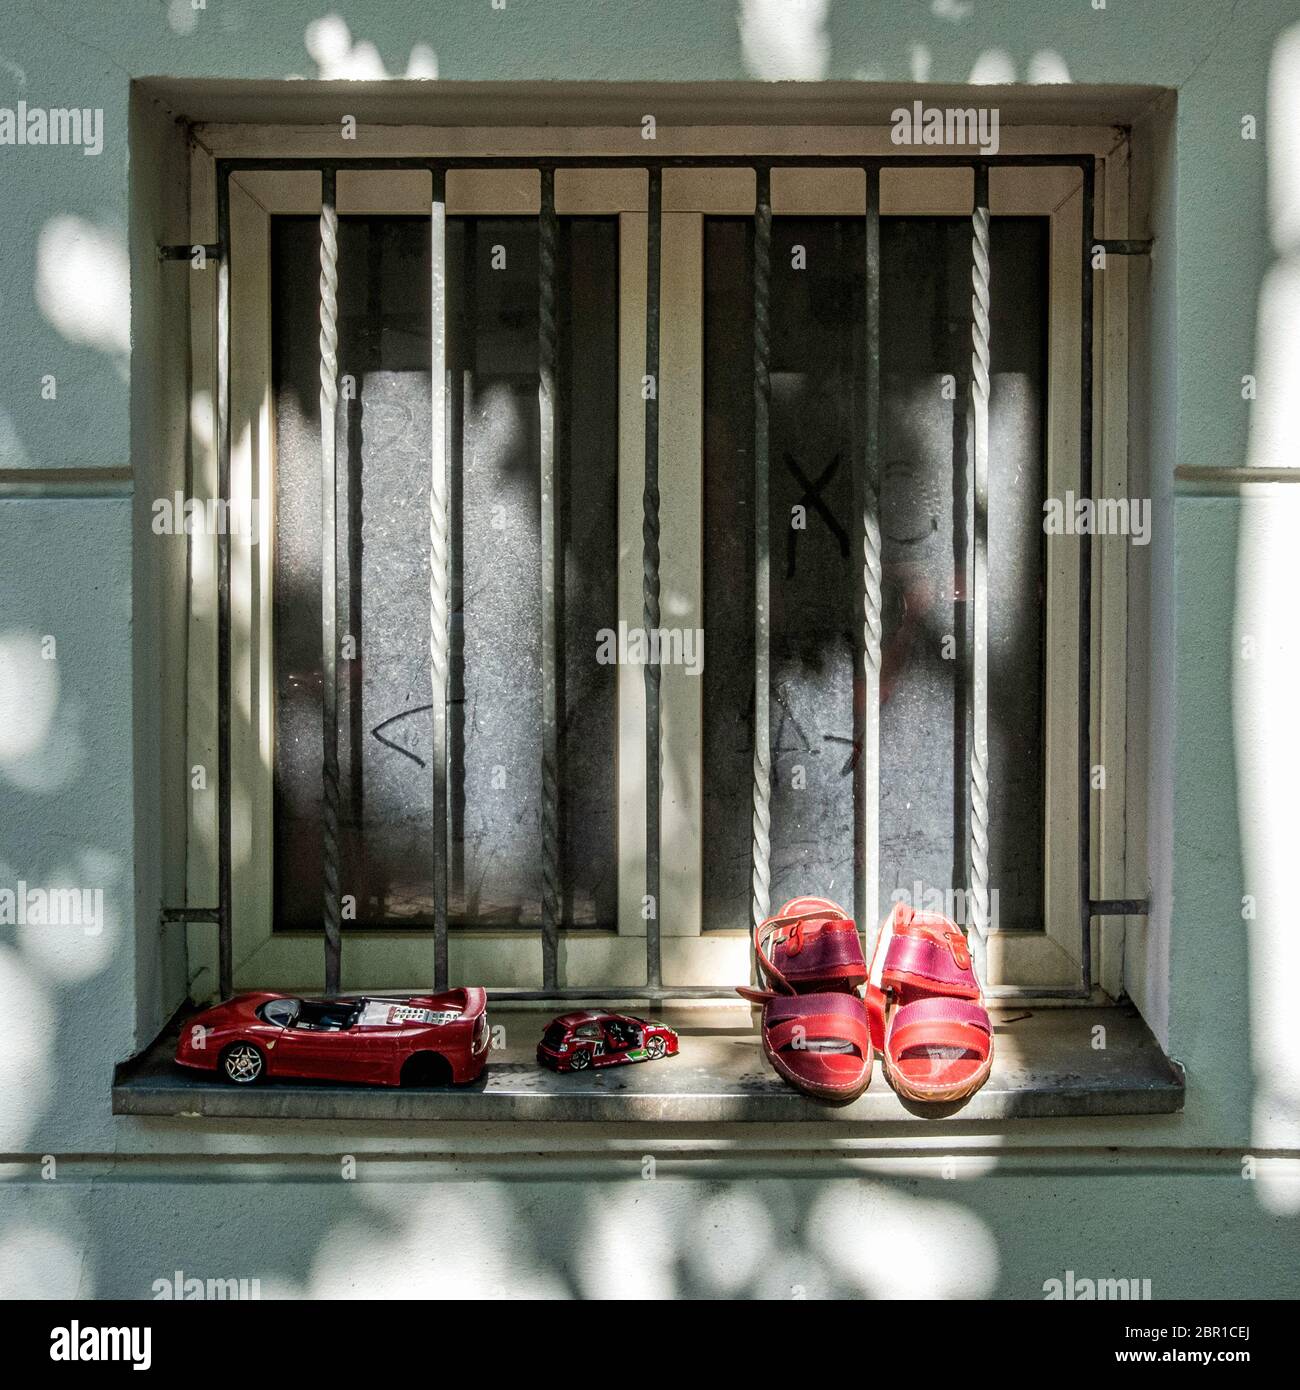 Sandals & Toy cars - Unwanted goods left on windowsill as gifts for passersby in Mitte, Berlin, Germany Stock Photo